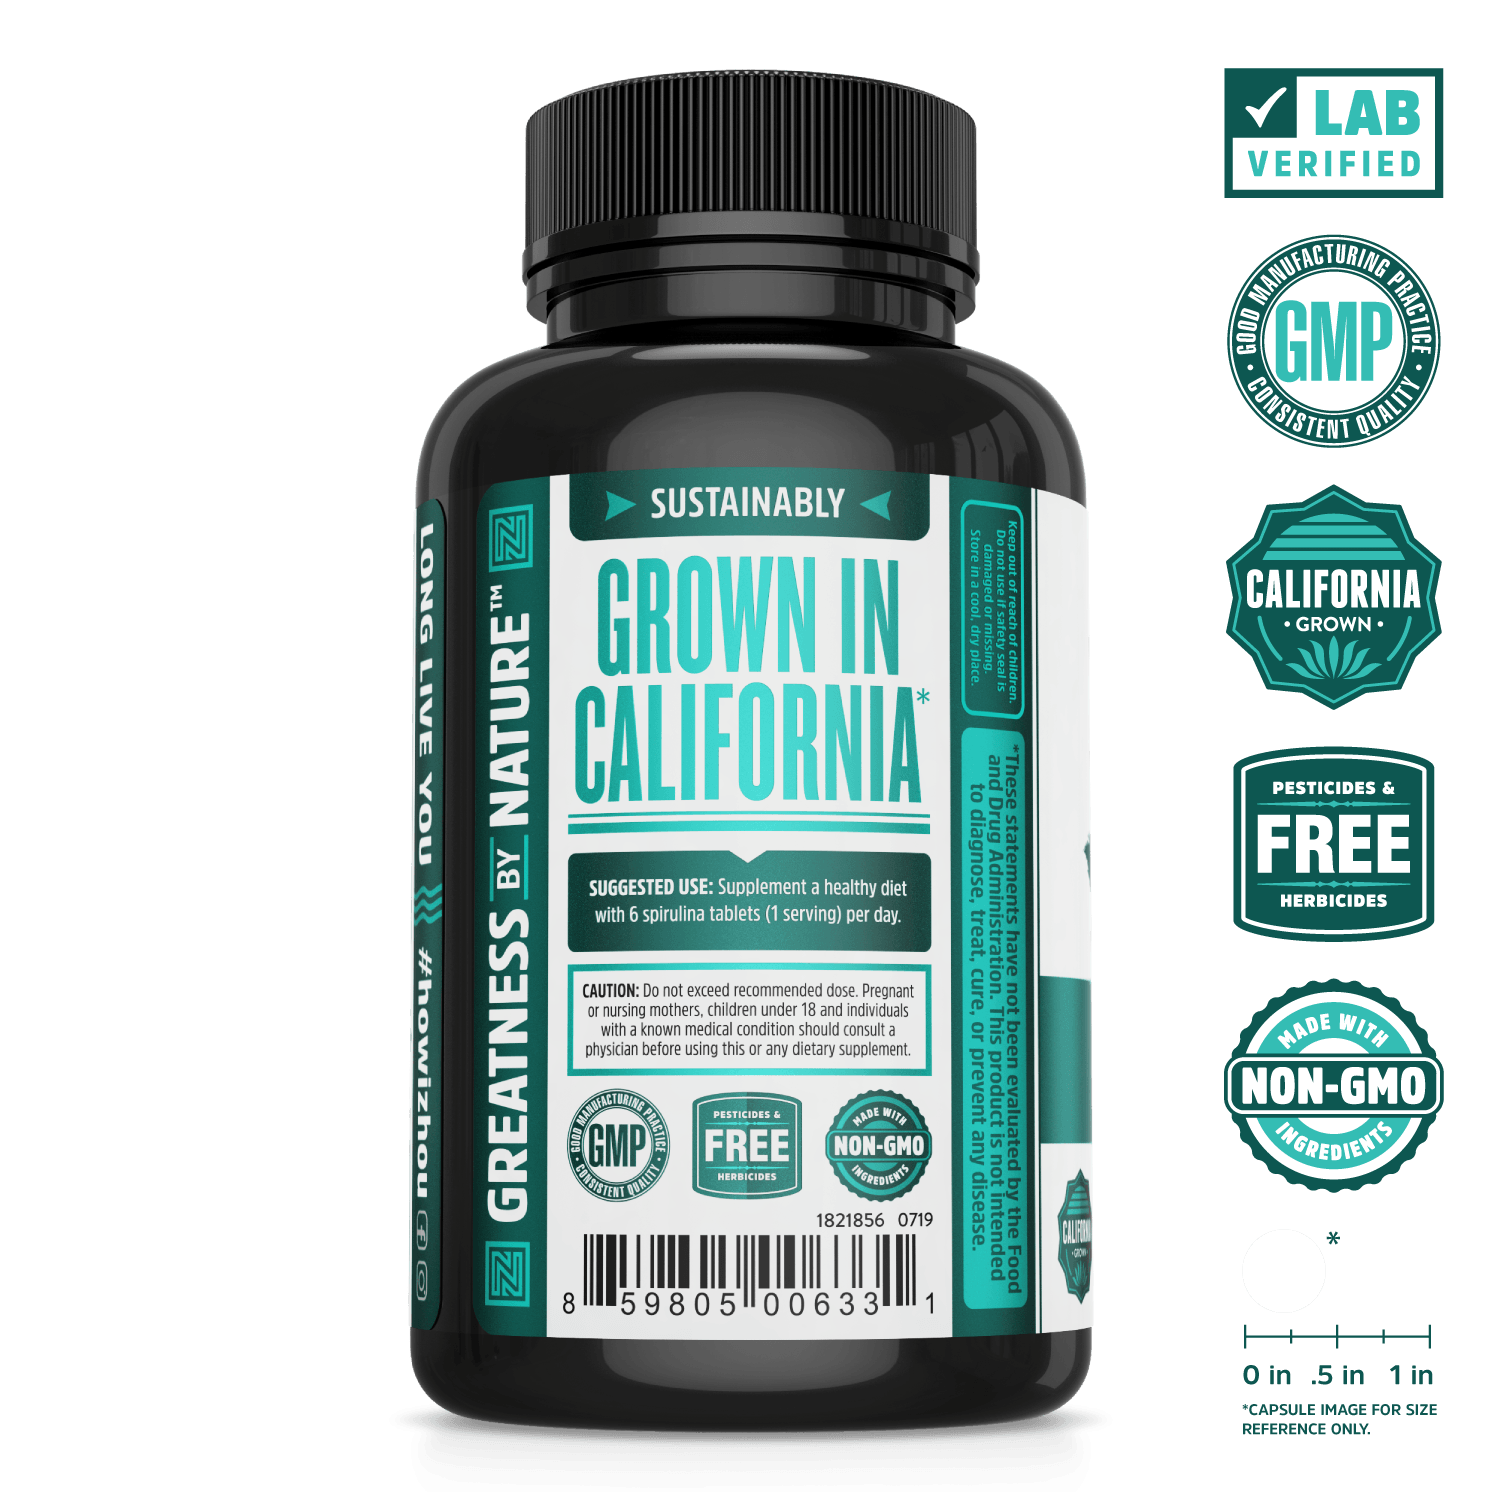 Zhou Nutrition Sustainably Grown Spirulina Tablets. Lab verified, good manufacturing practices, california grown, pesticides & herbicides free, made with non-GMO ingredients